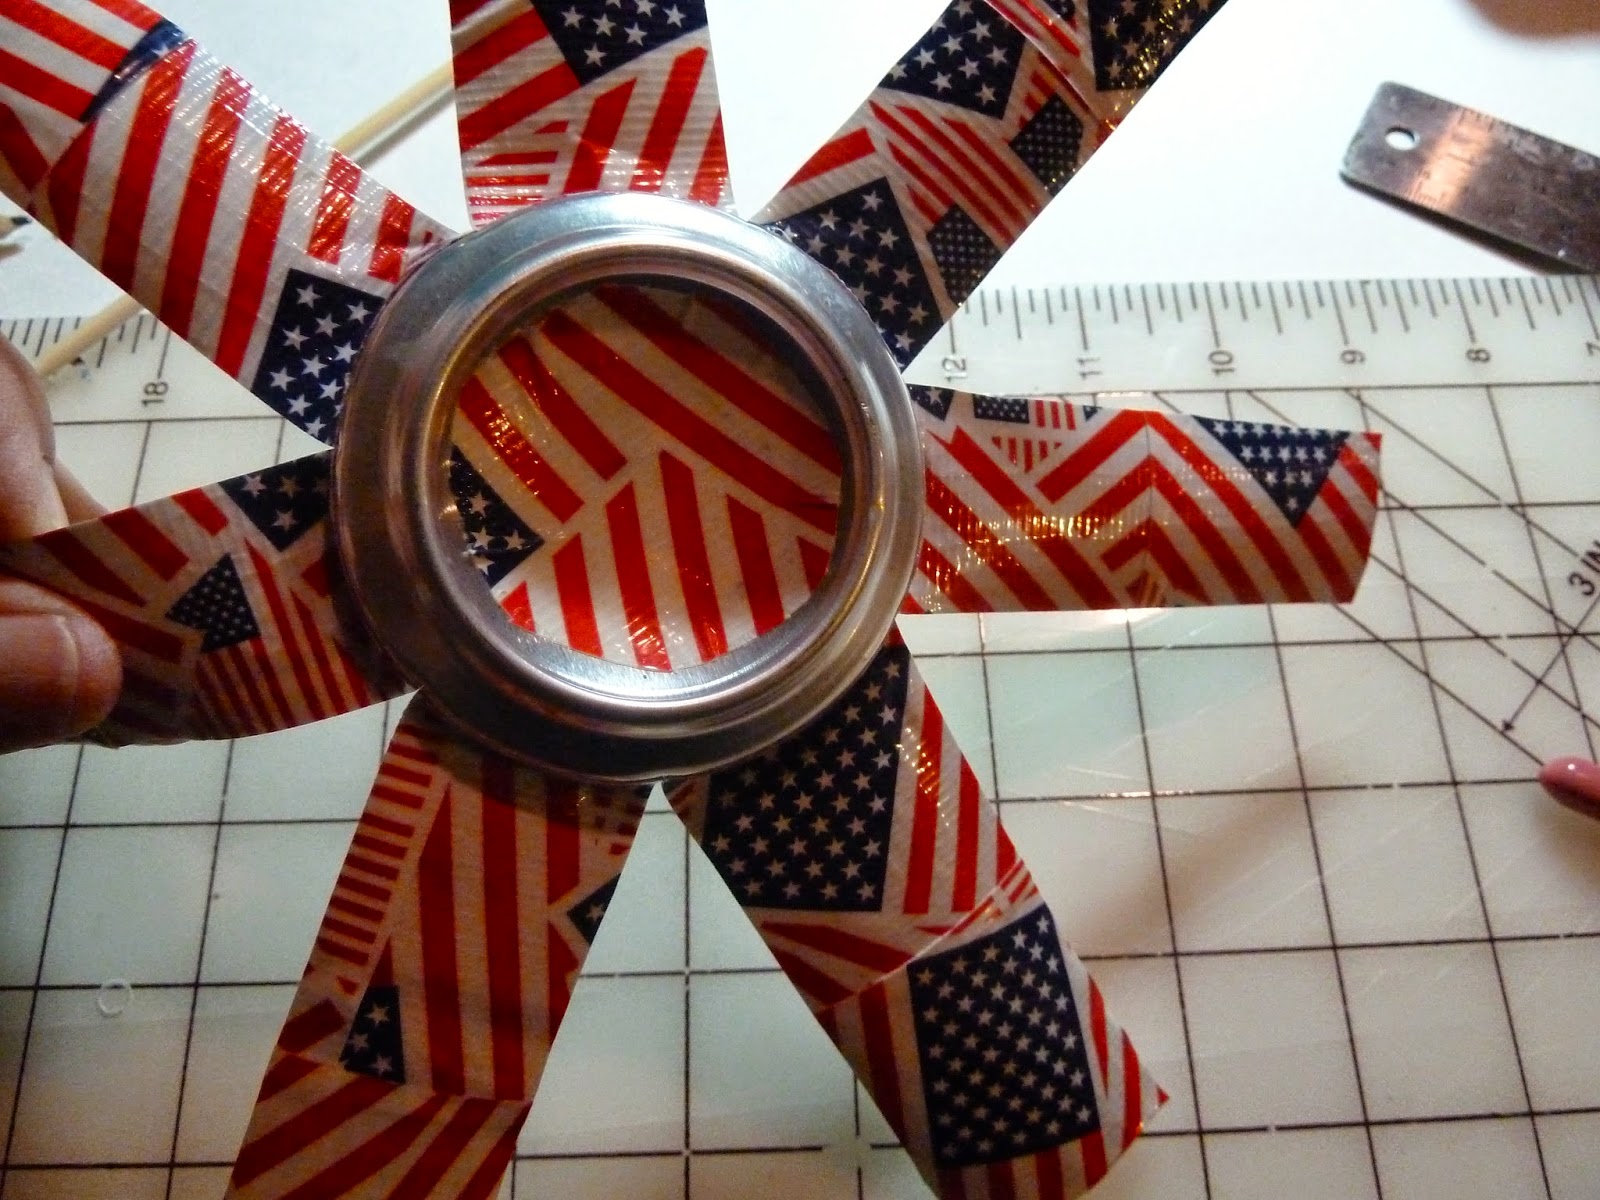 Soda Can Cutter – The Neverending Projects List